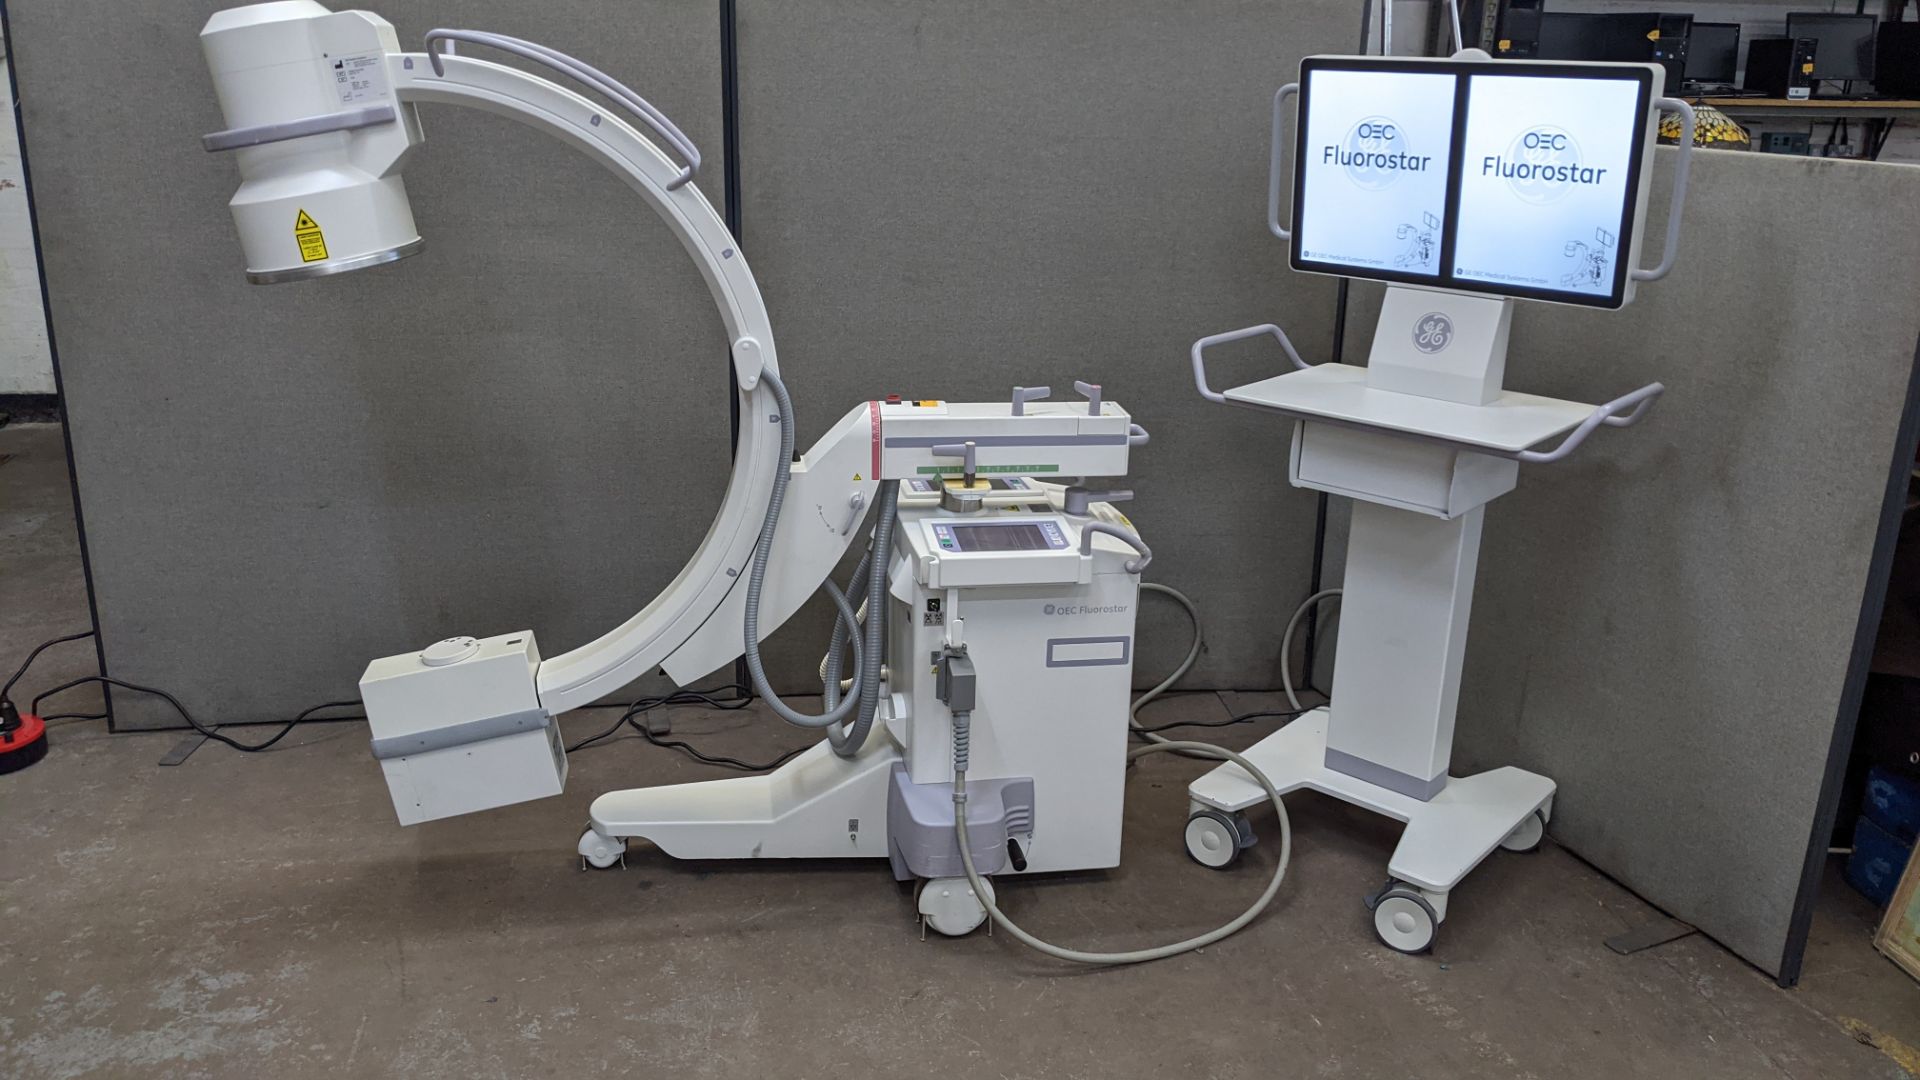 GE-OEC Fluorostar imaging system, purchased new in August 2017. EO4 Series.